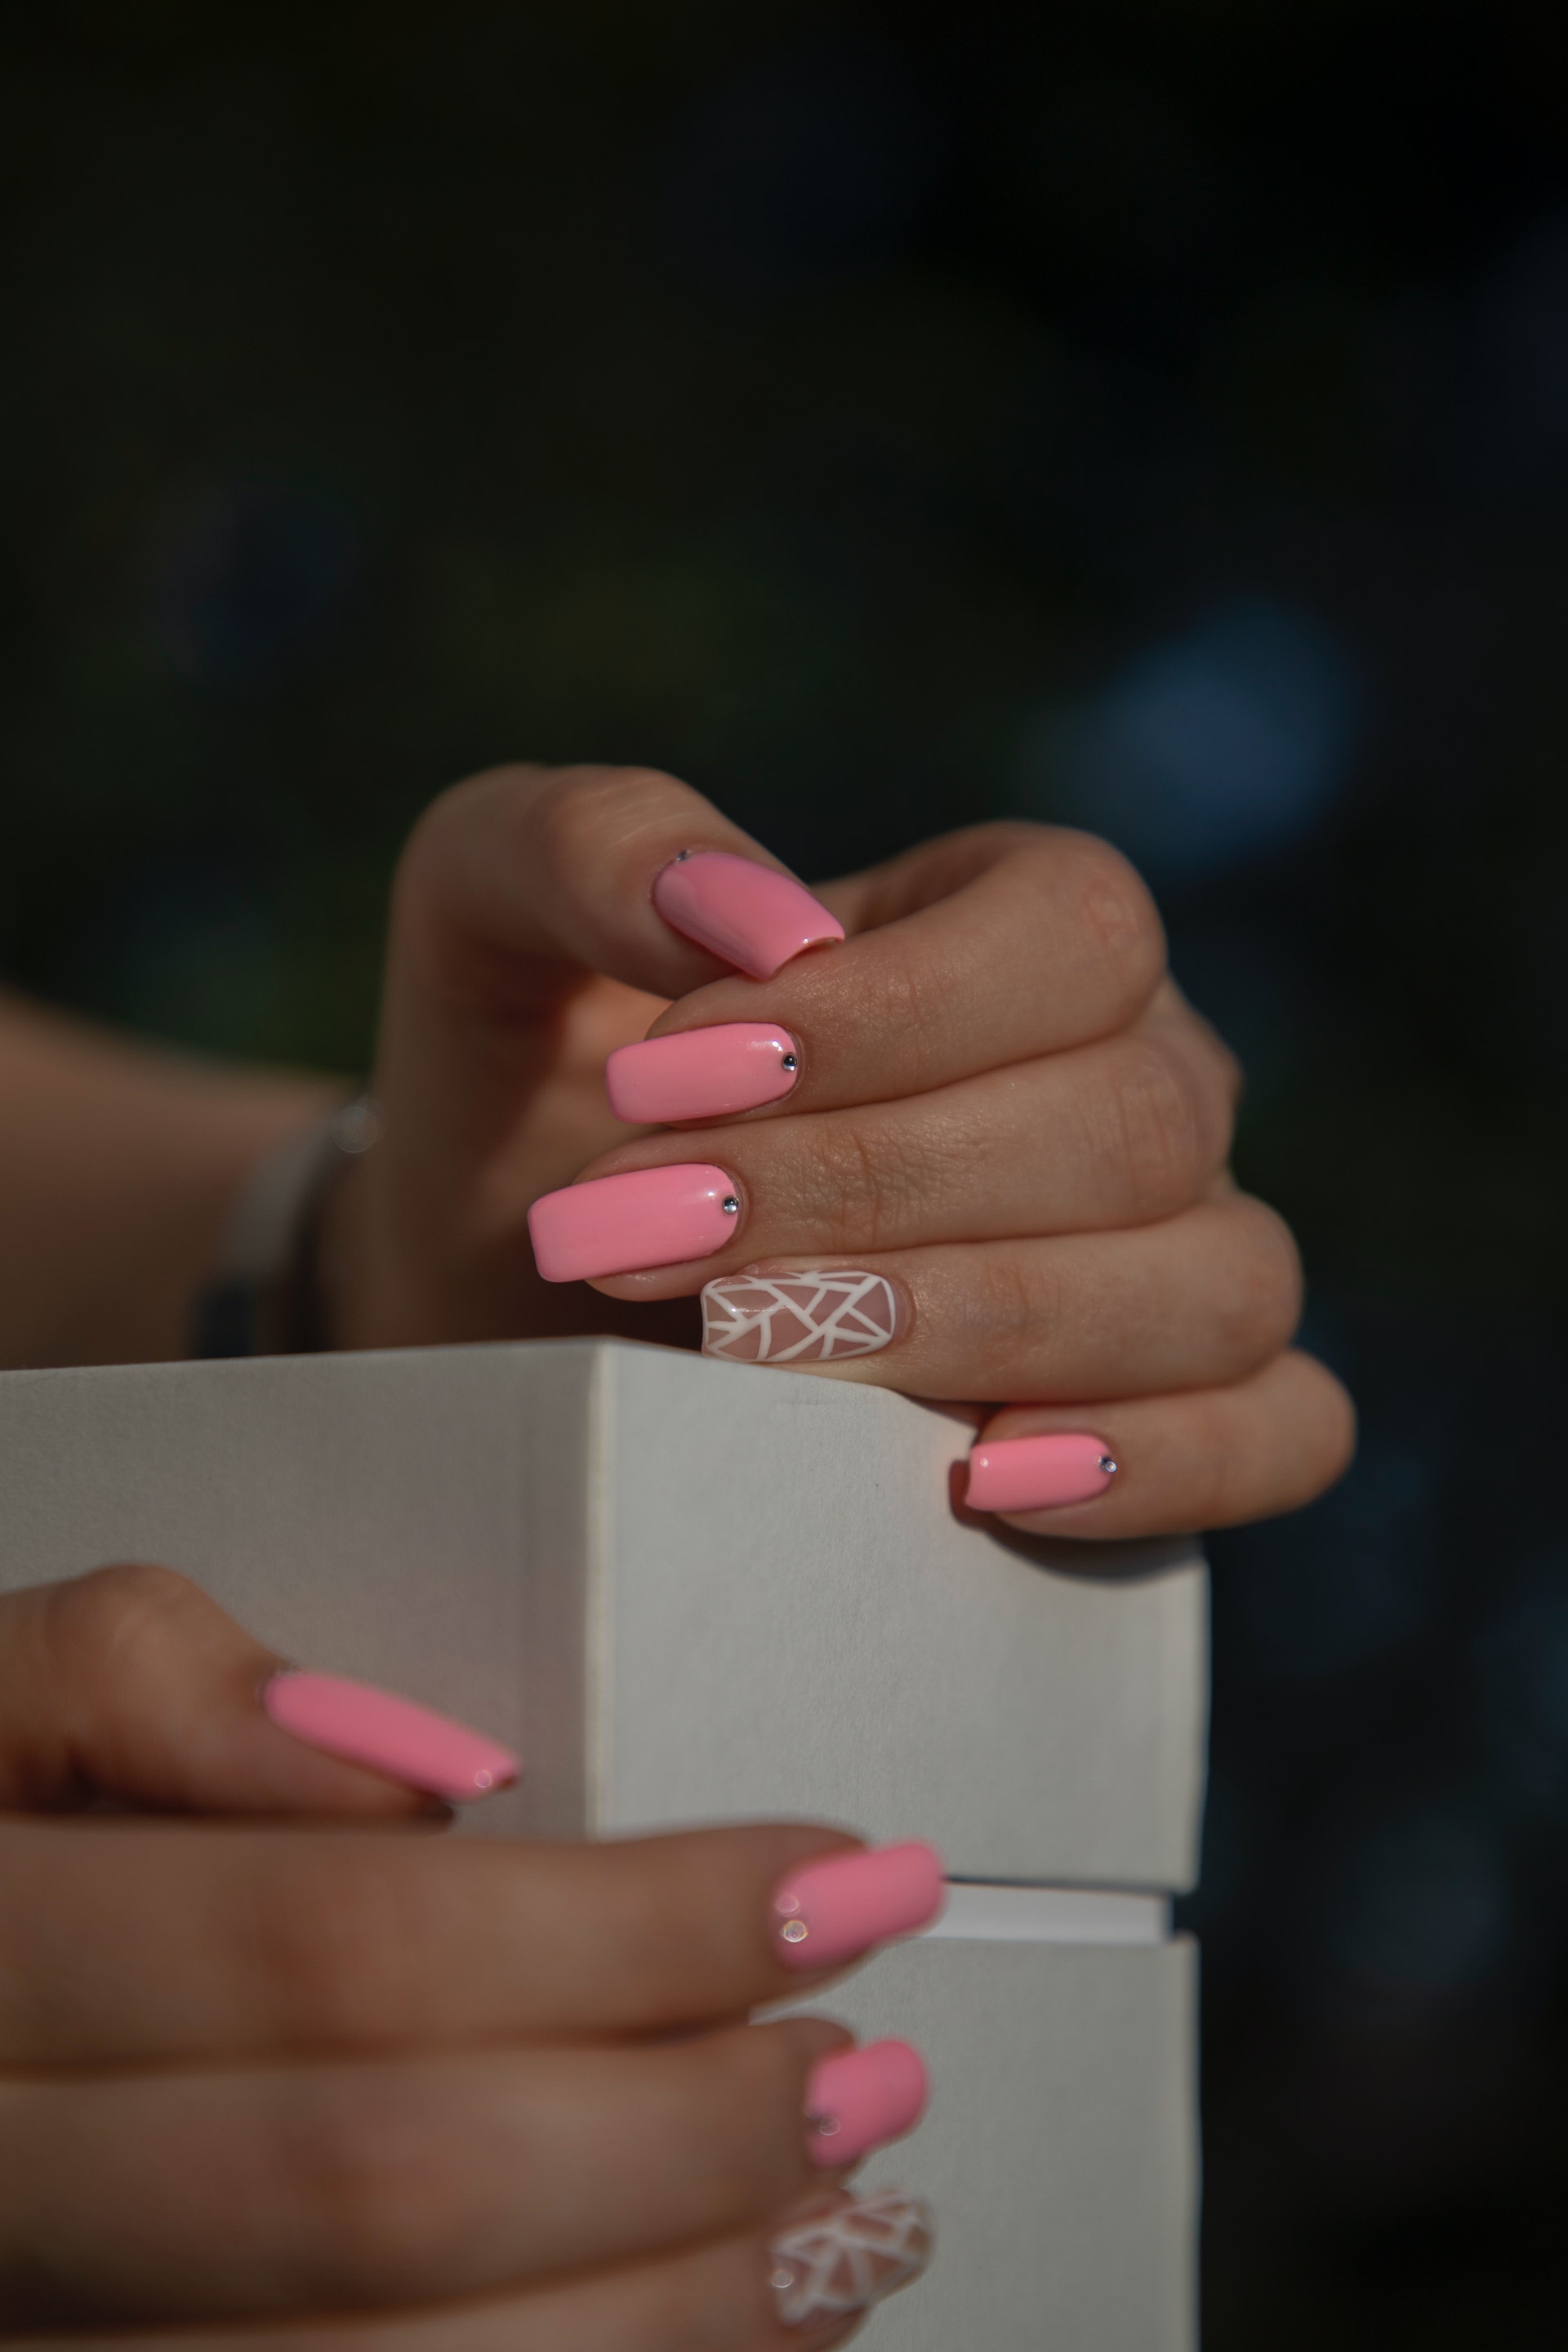 Female hands adorned with pink nail polish | Source: Pexels